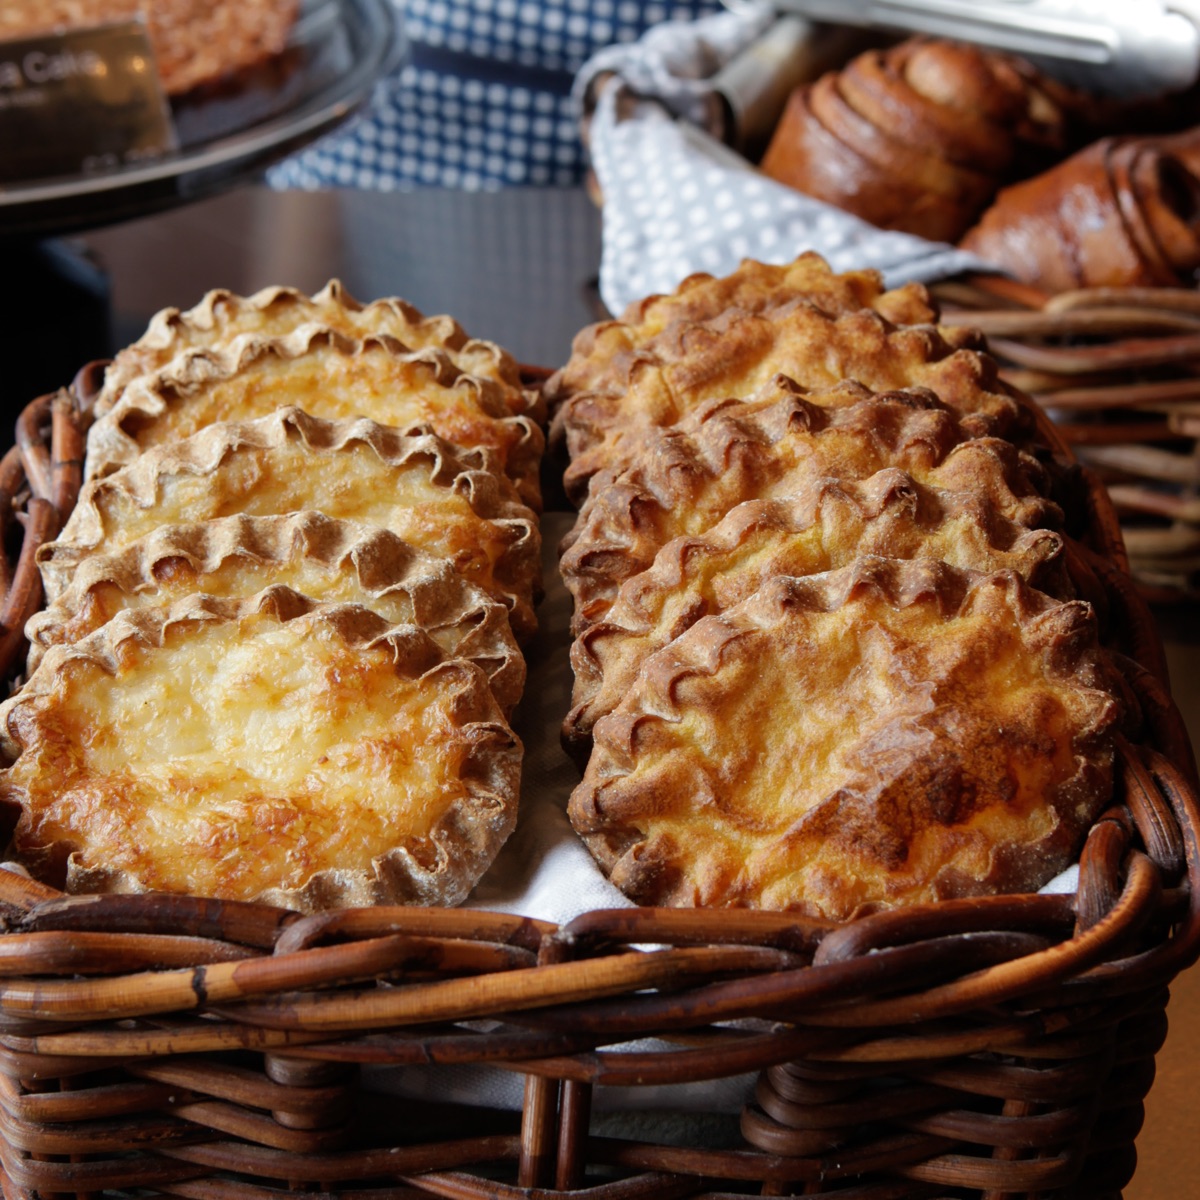 Karelian pies from Nordic Bakery in London. A delicious rye-crusted savoury snack, the Karelian pie is made with rice or potato mash filling and served with egg-butter spread. Image courtesy of Nordic Bakery.